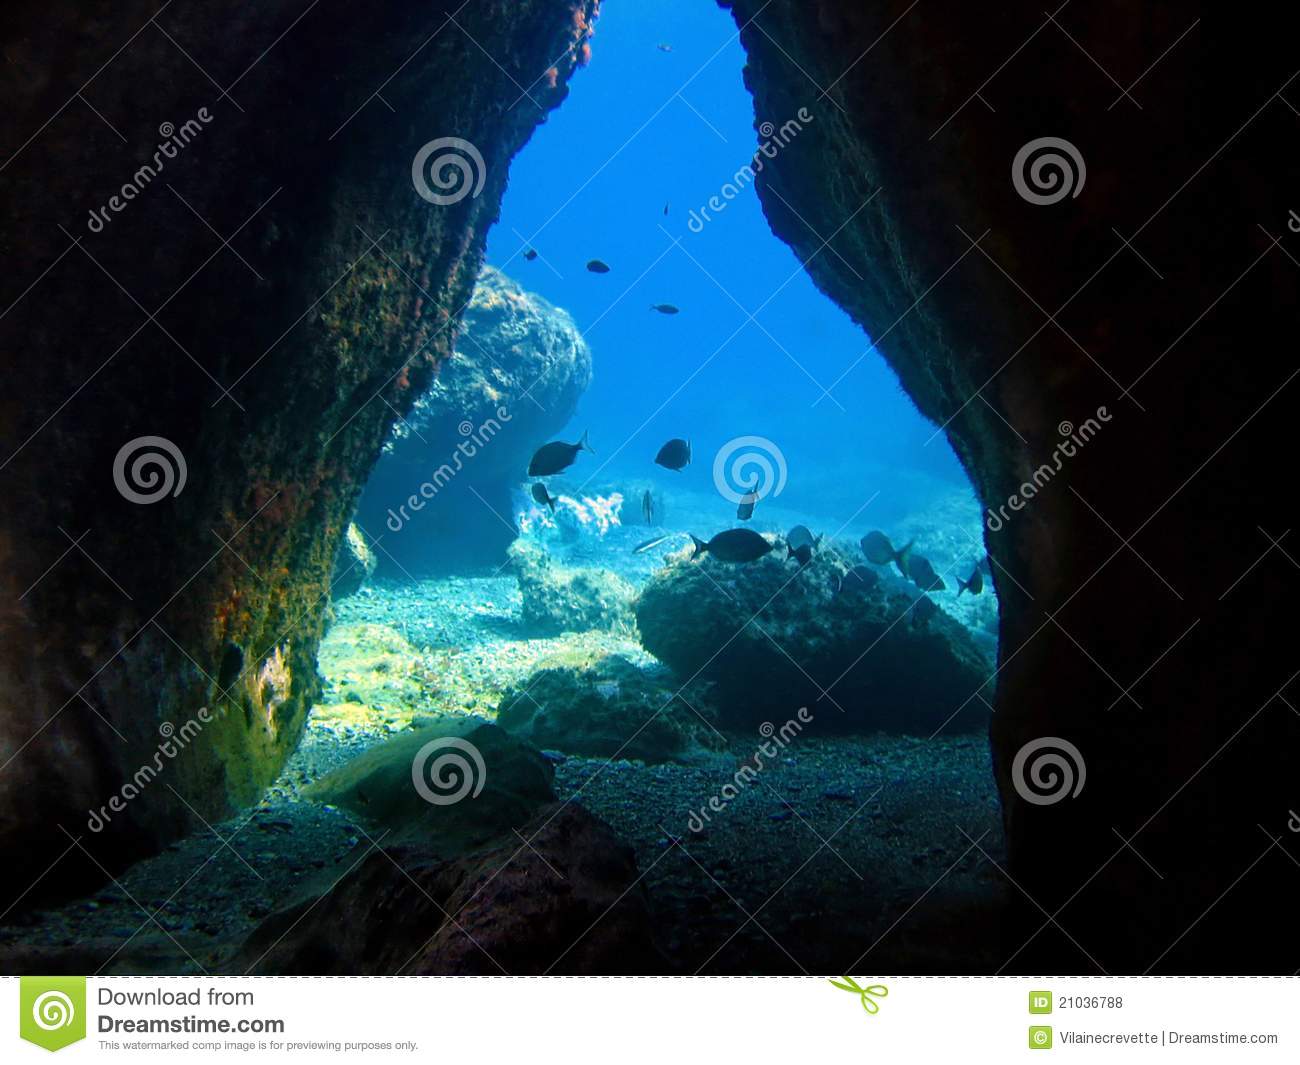 Underwater Cave Royalty Free Stock Photos   Image  21036788